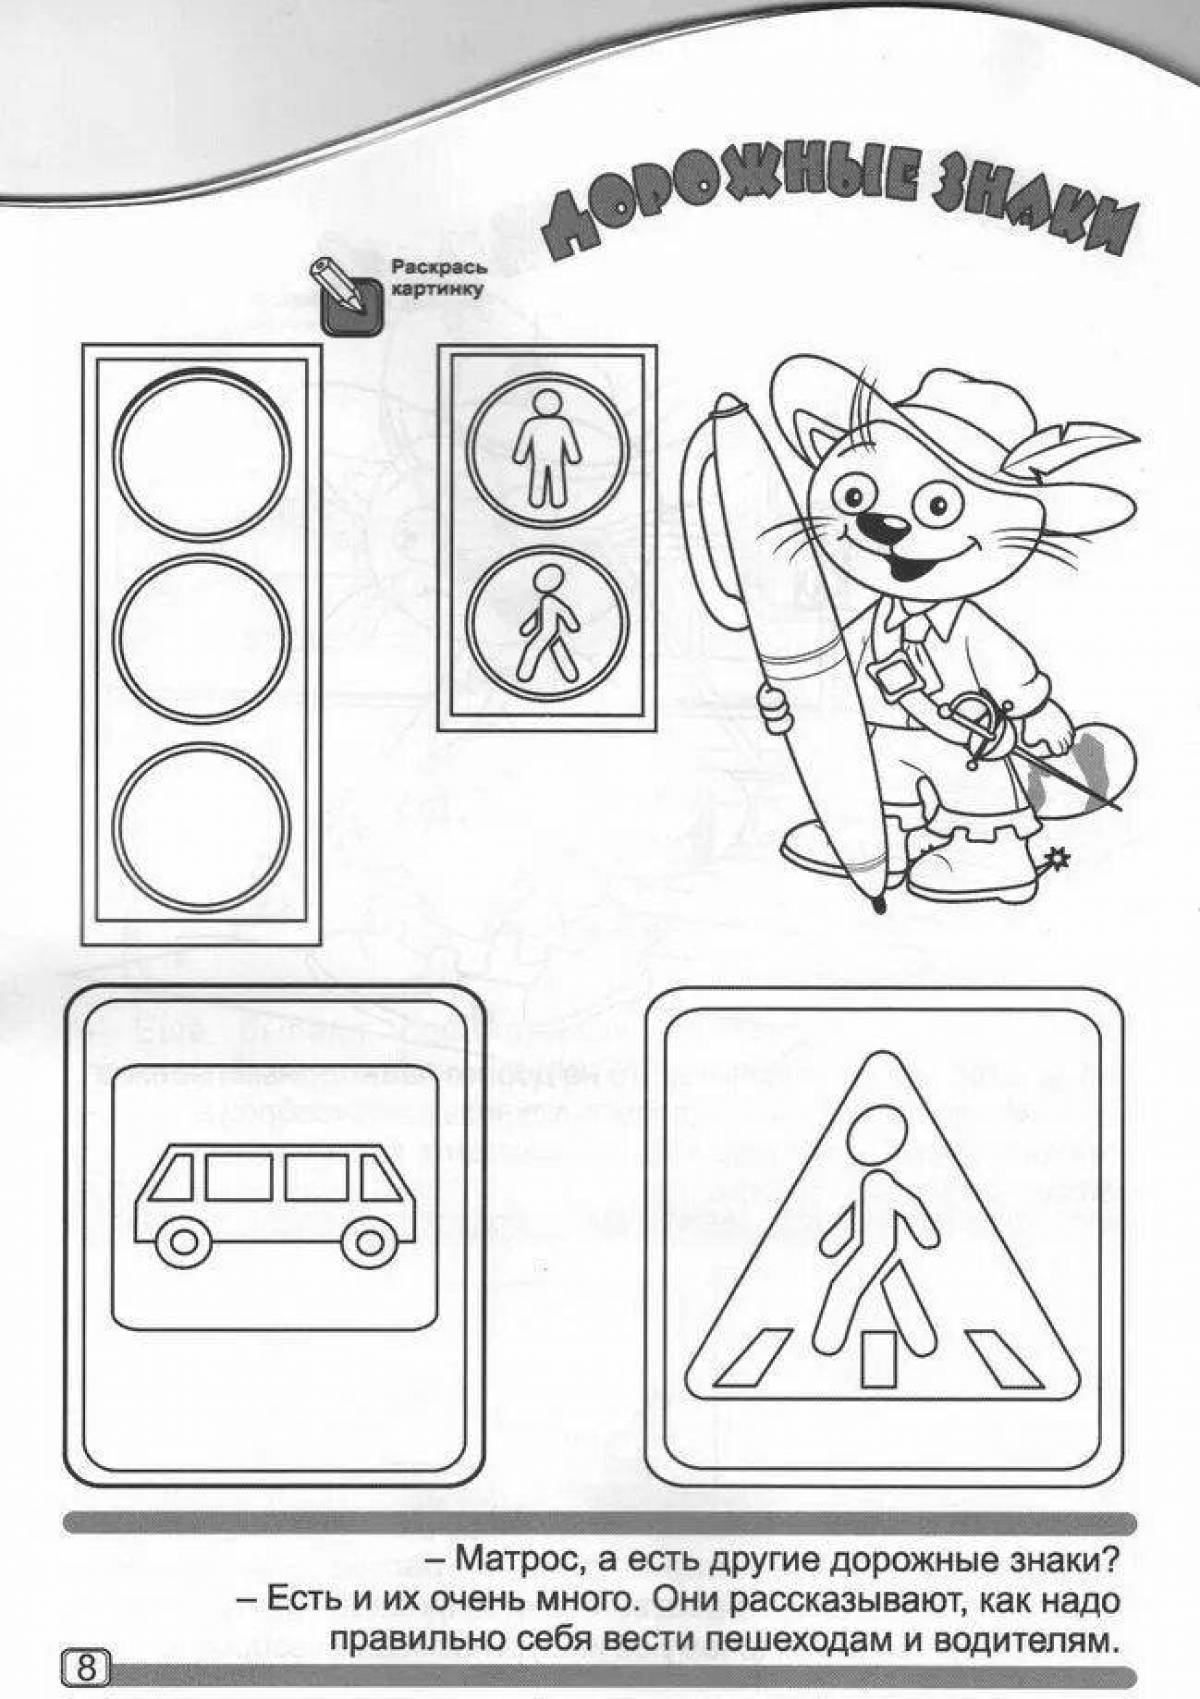 Traffic signs for kids in pictures #1